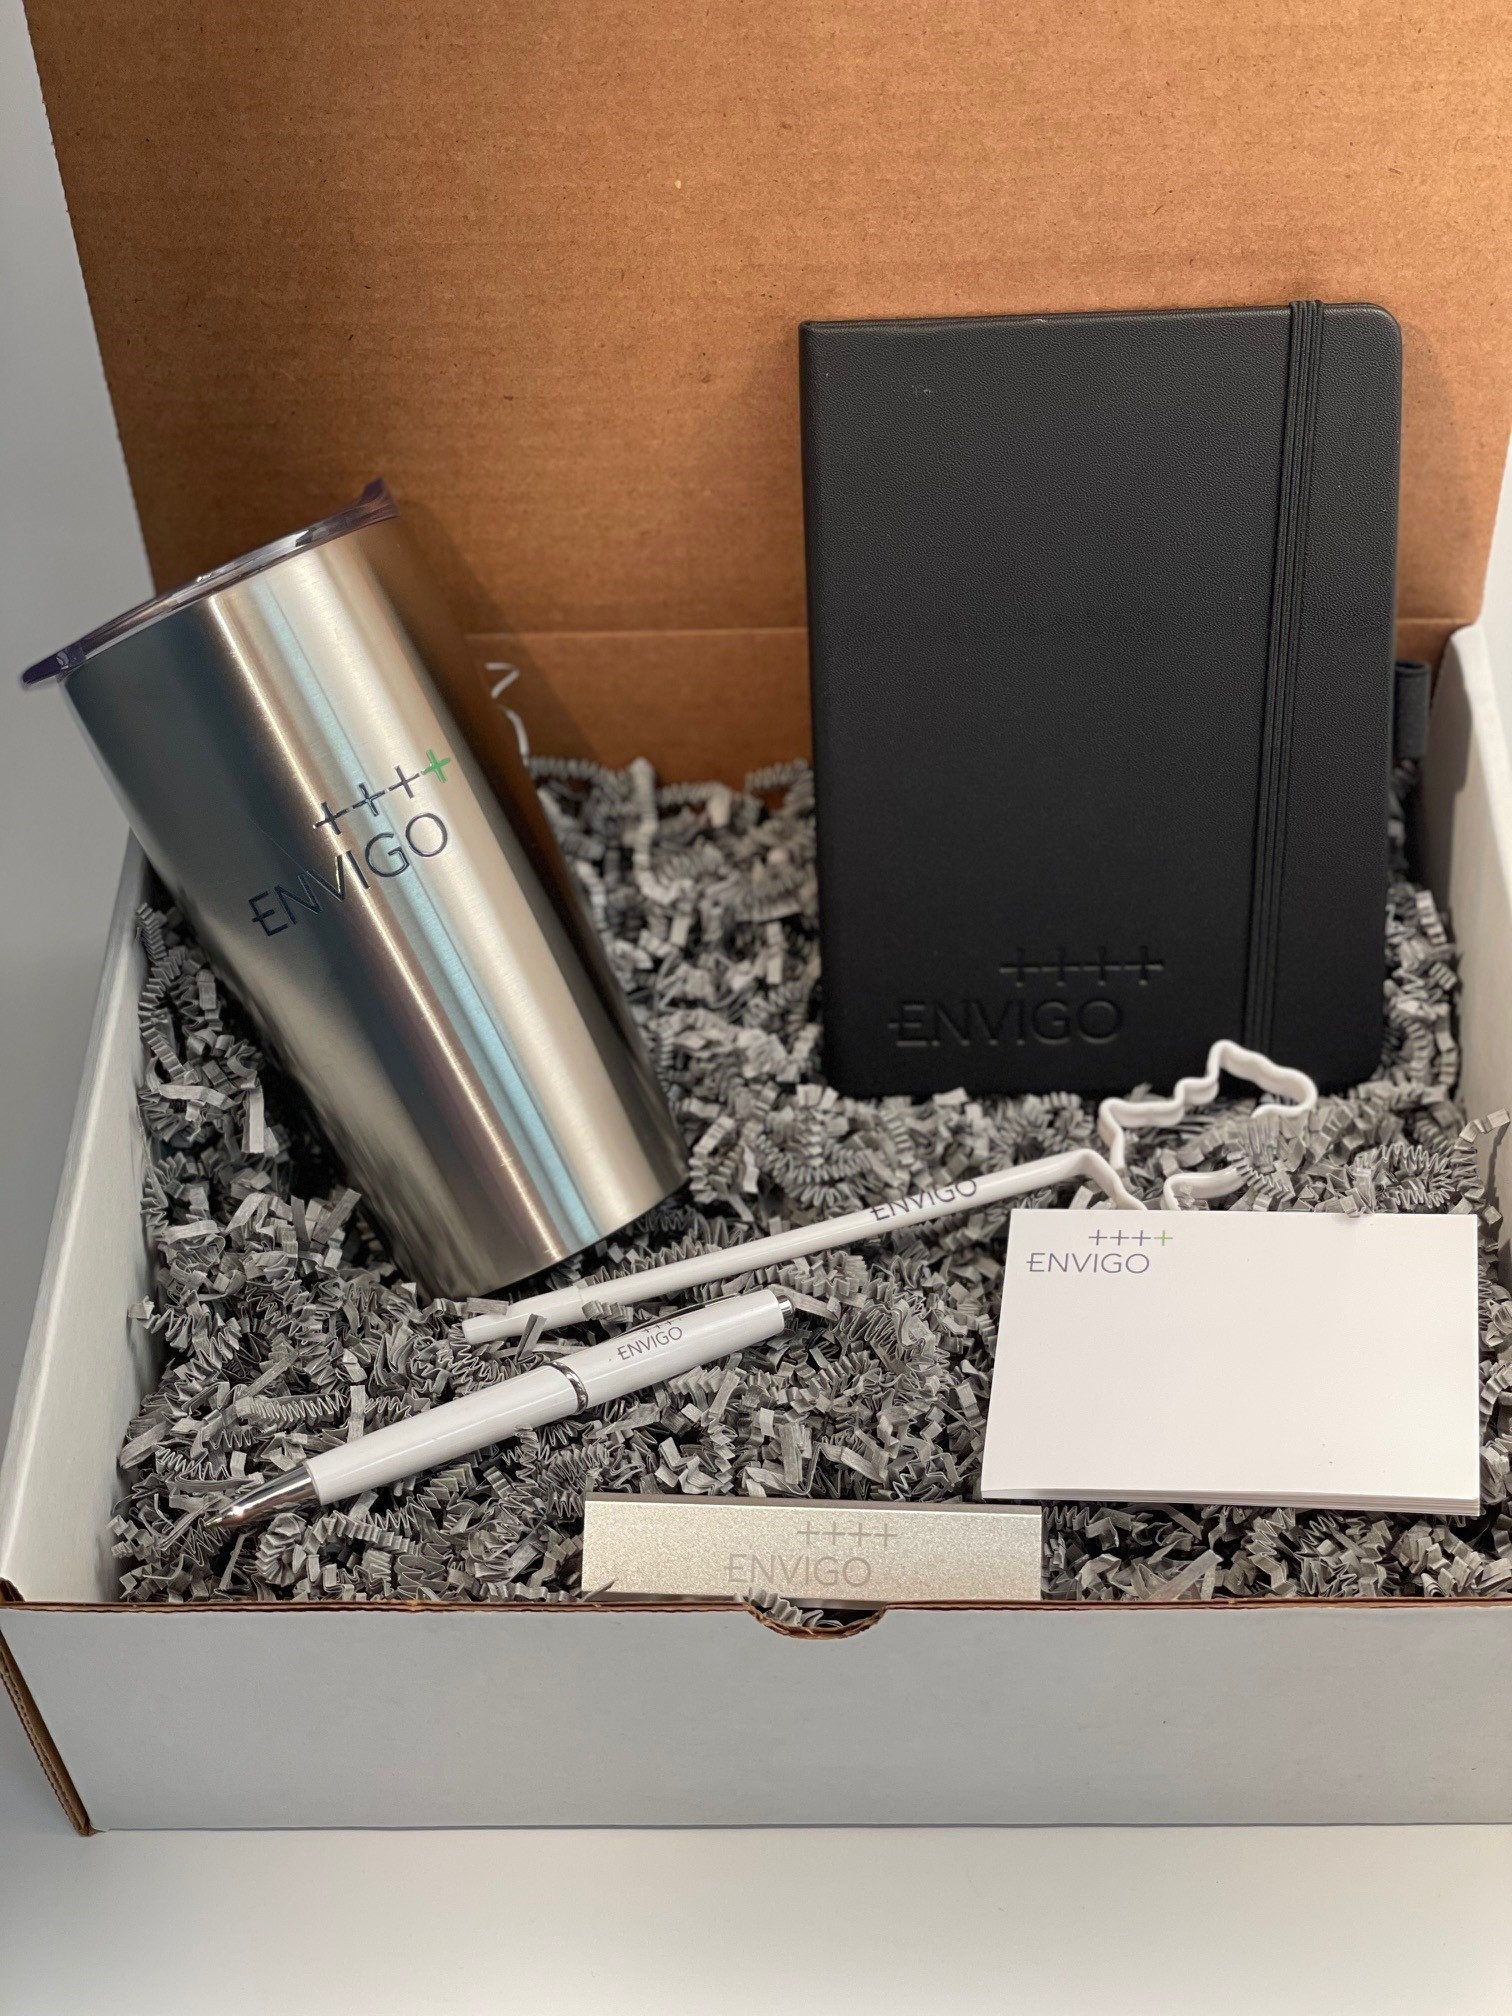 Envigo SWAG - Includes $50 digital Amazon Gift Card, aluminum tumbler, metal straws, black notebook, two post-it pads, two standard pens, two mouse pens, one power bank, one thermal white cup and one USB Drive